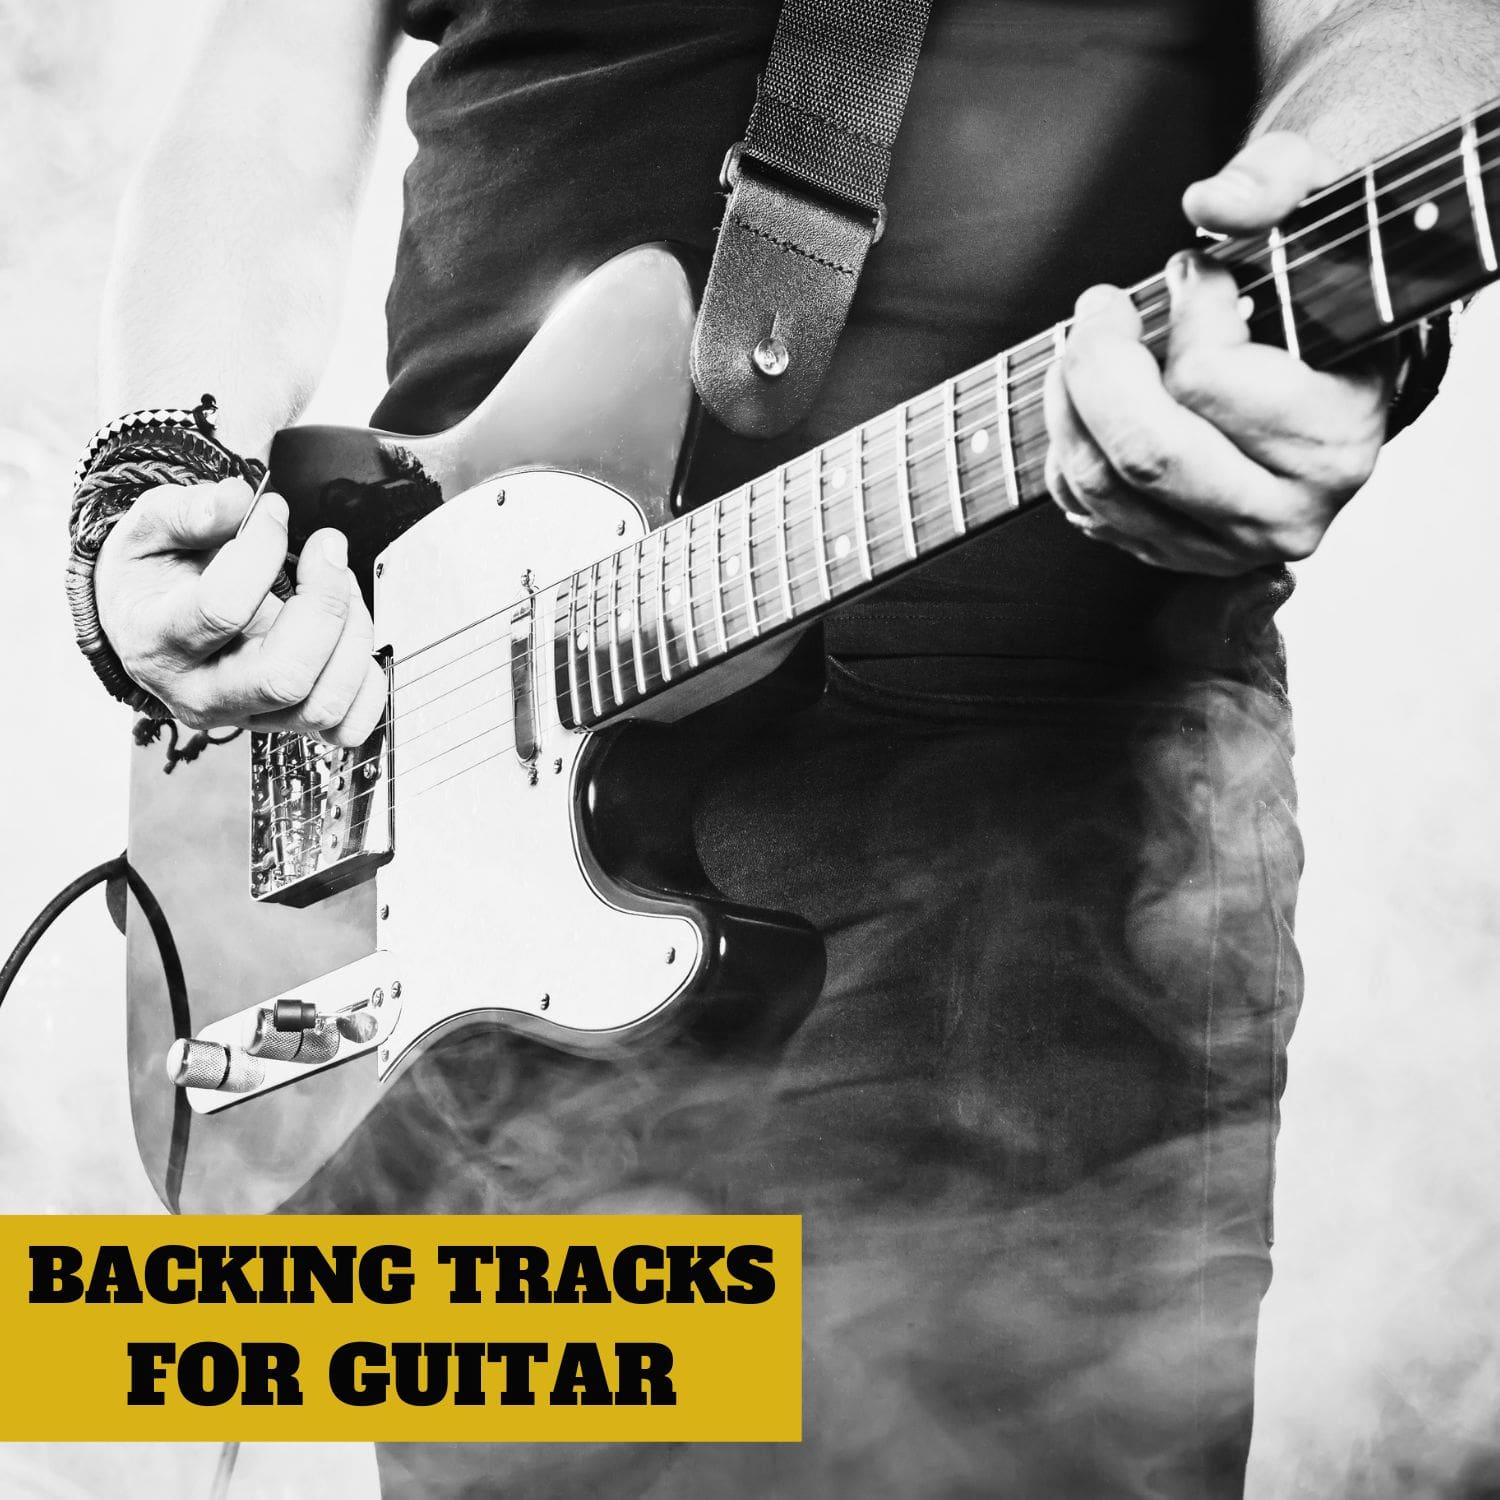 Backing tracks for guitarists